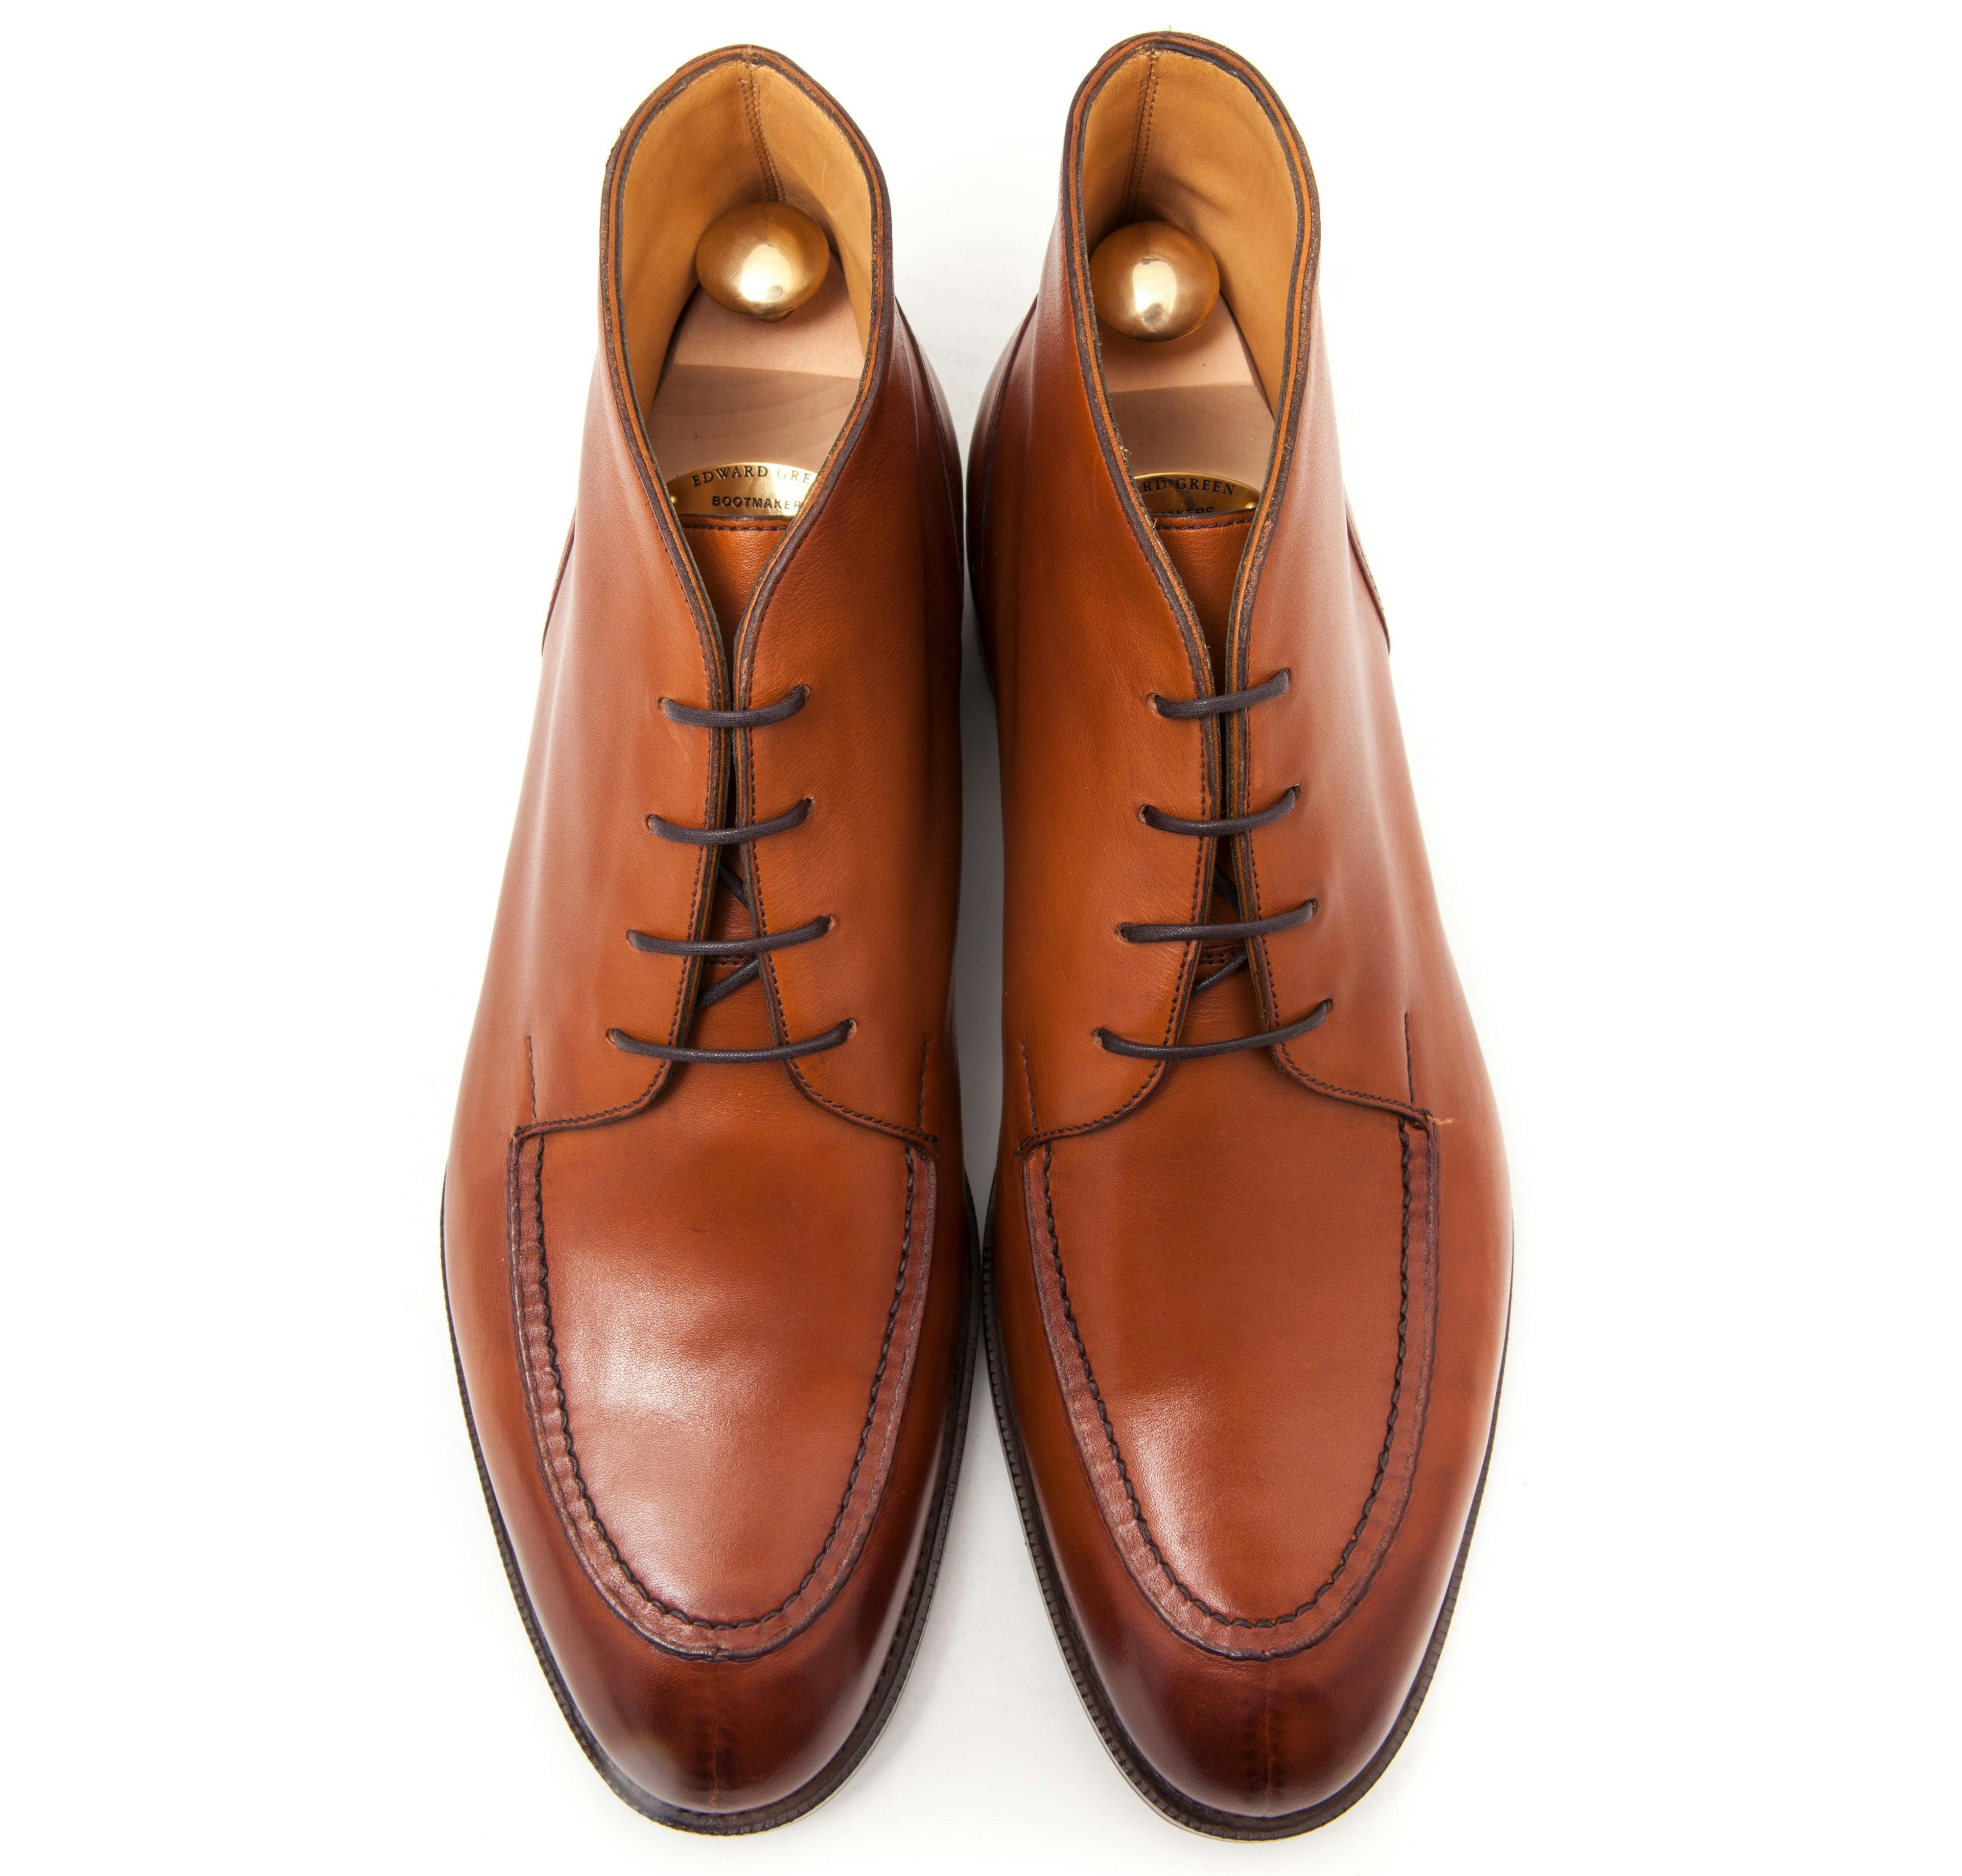 Top view of an Edward Green Halifax in chestnut Delapre.